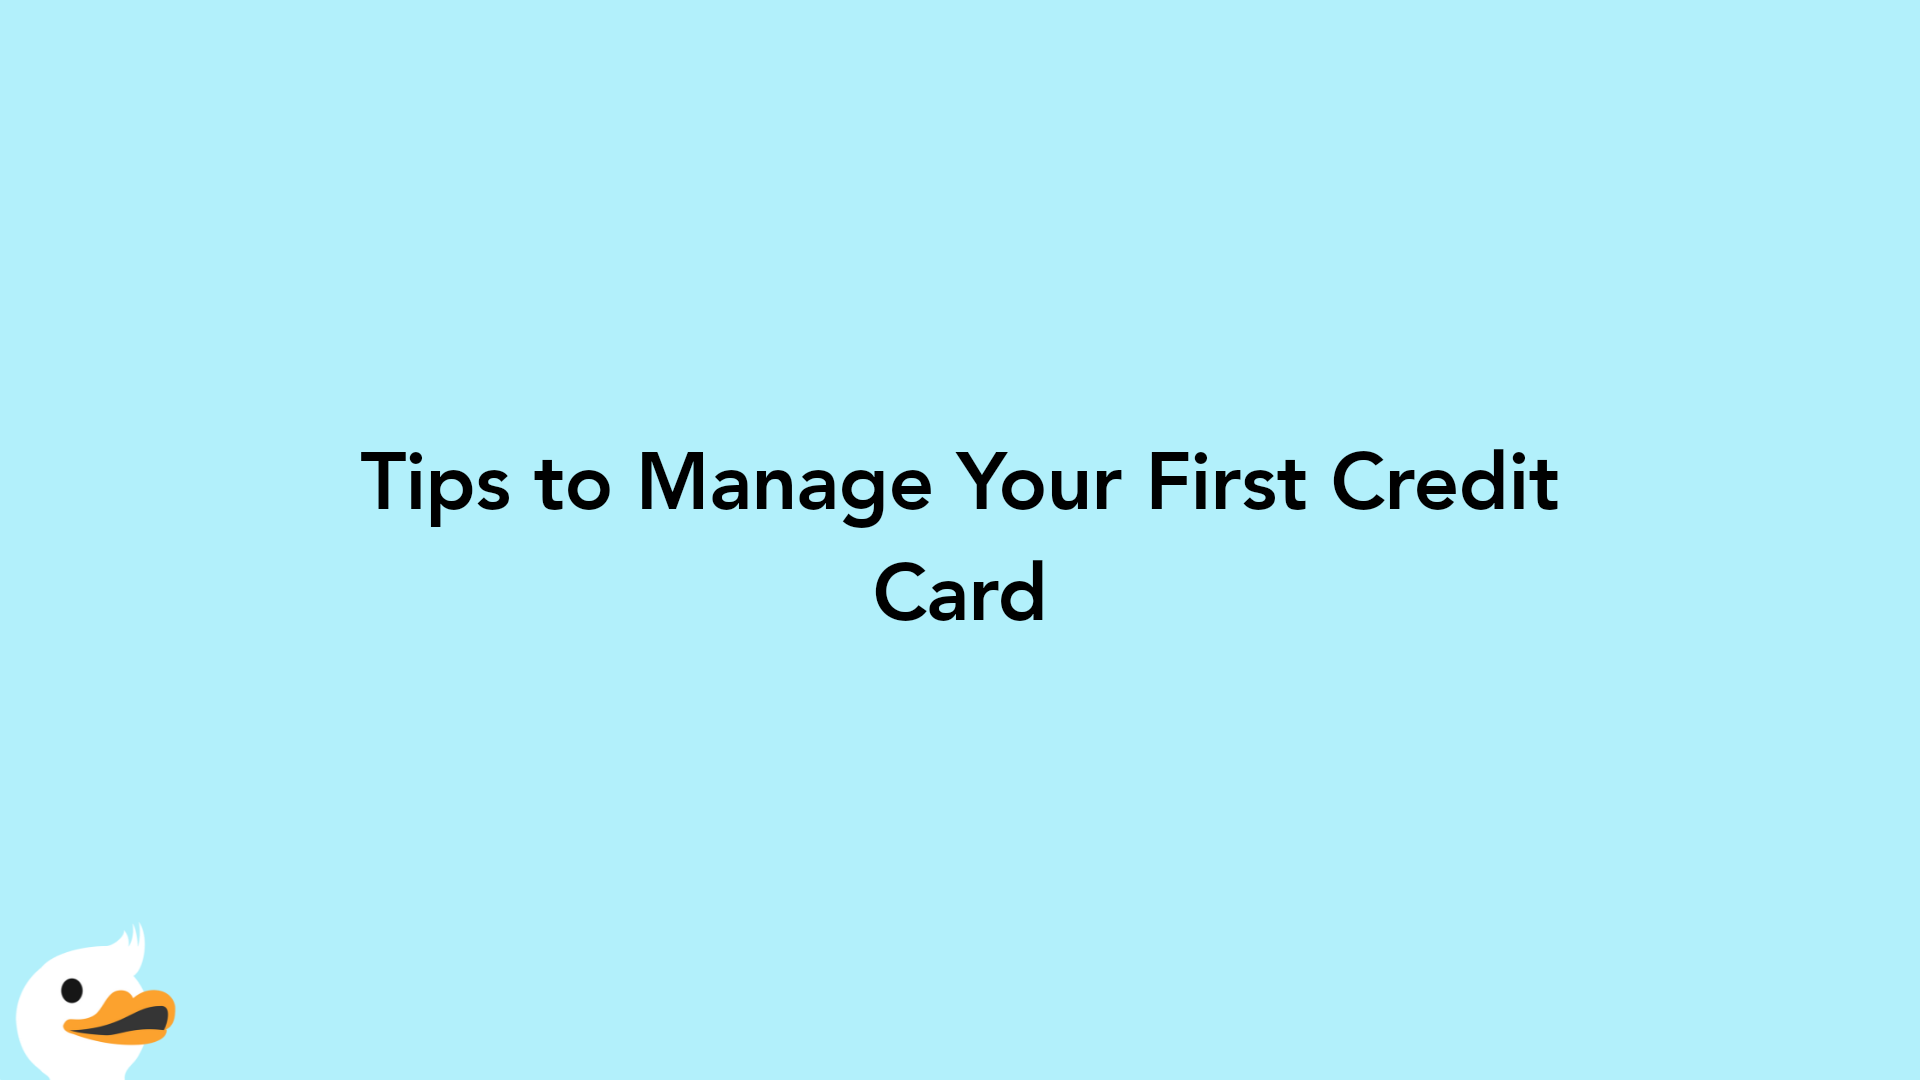 Tips to Manage Your First Credit Card